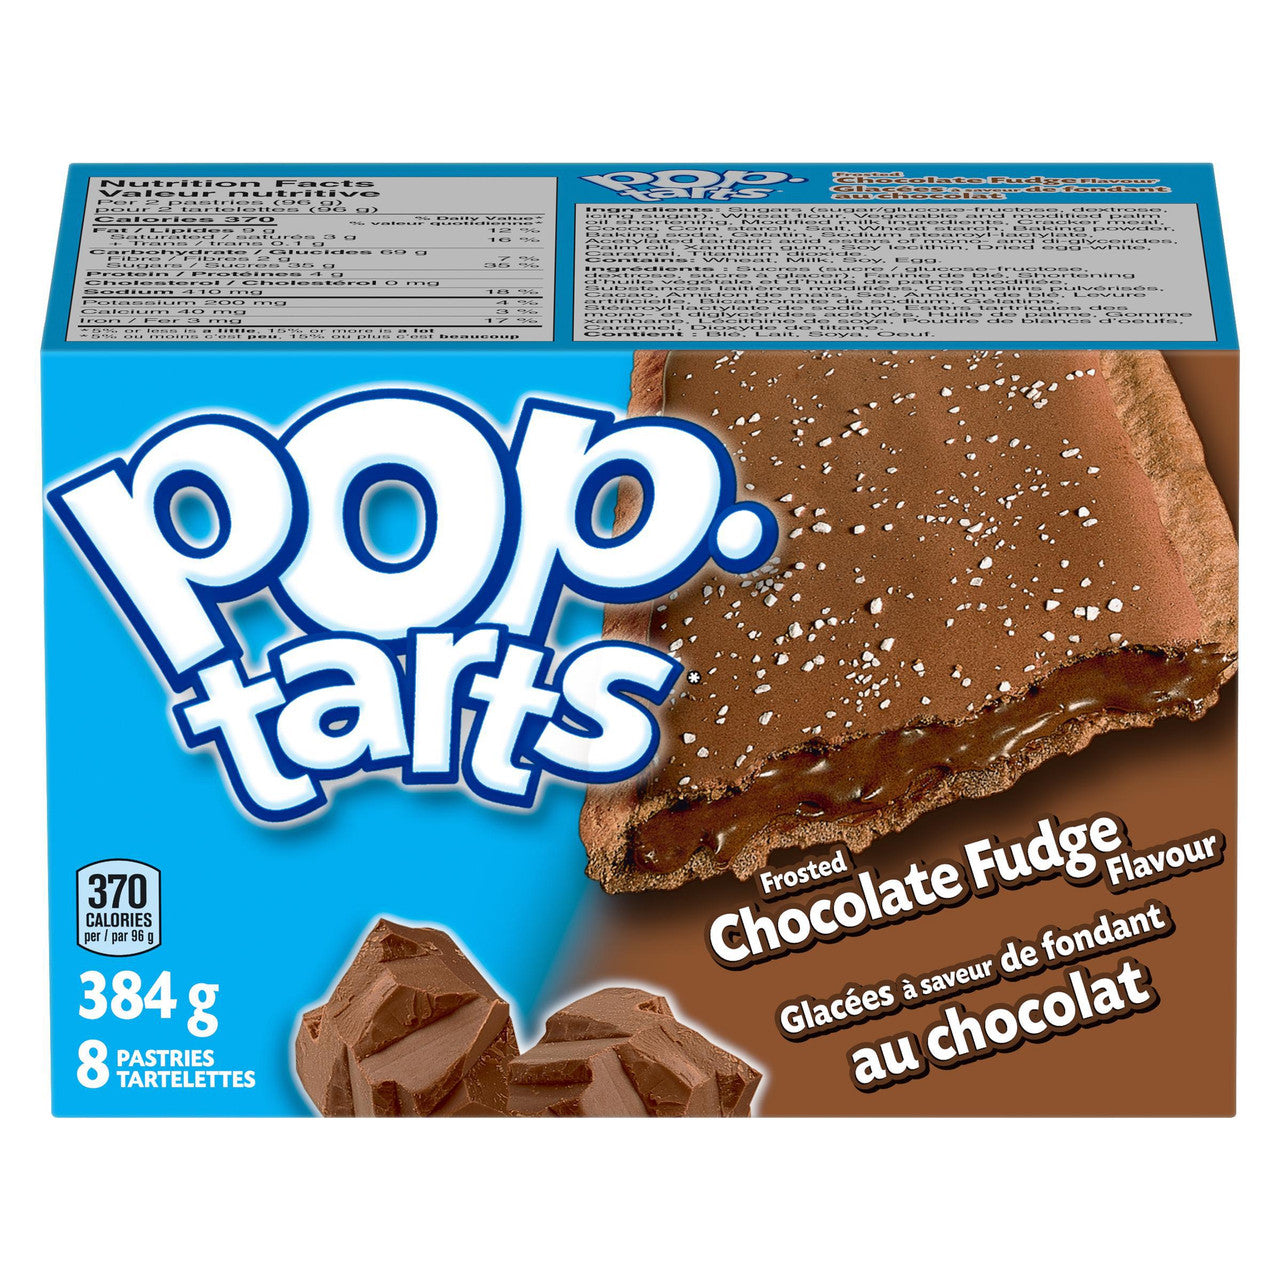 Kellogg's Pop-Tarts Frosted Chocolate Chip - 13.5 OZ 12 Pack